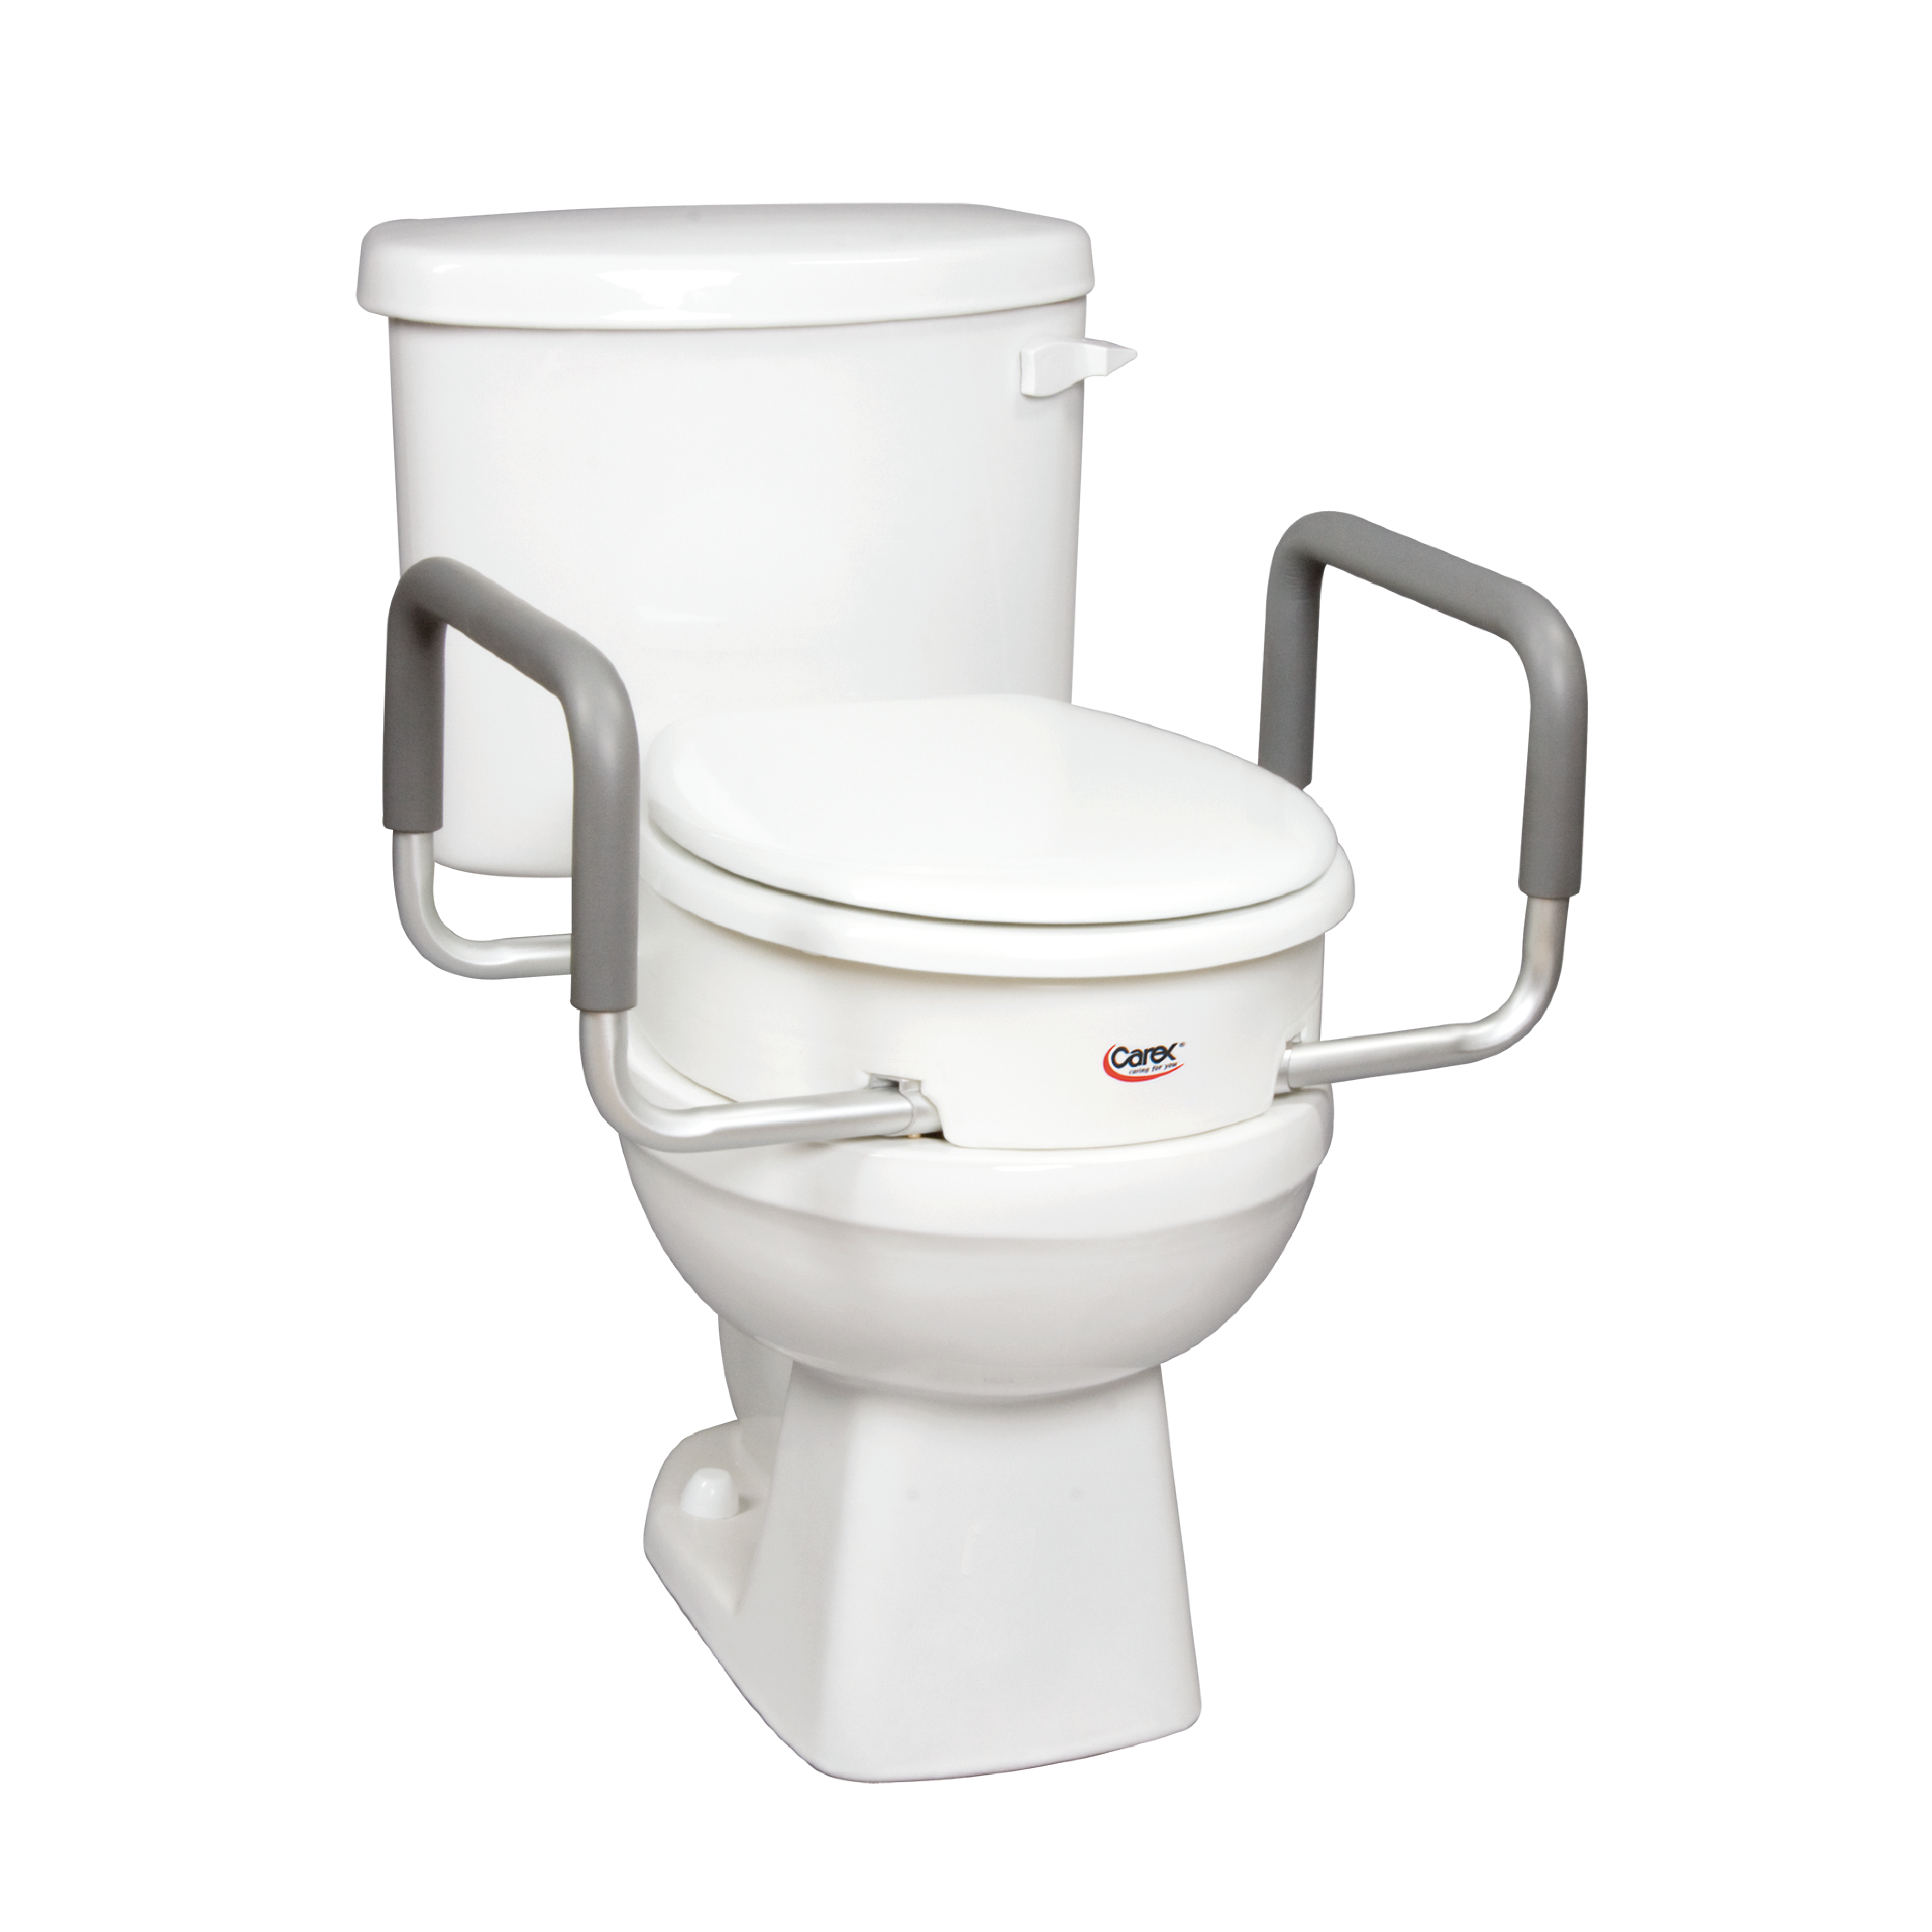 Carex Toilet Seat Elevator with Handles - For Elongated Toilets - Carex Health Brands